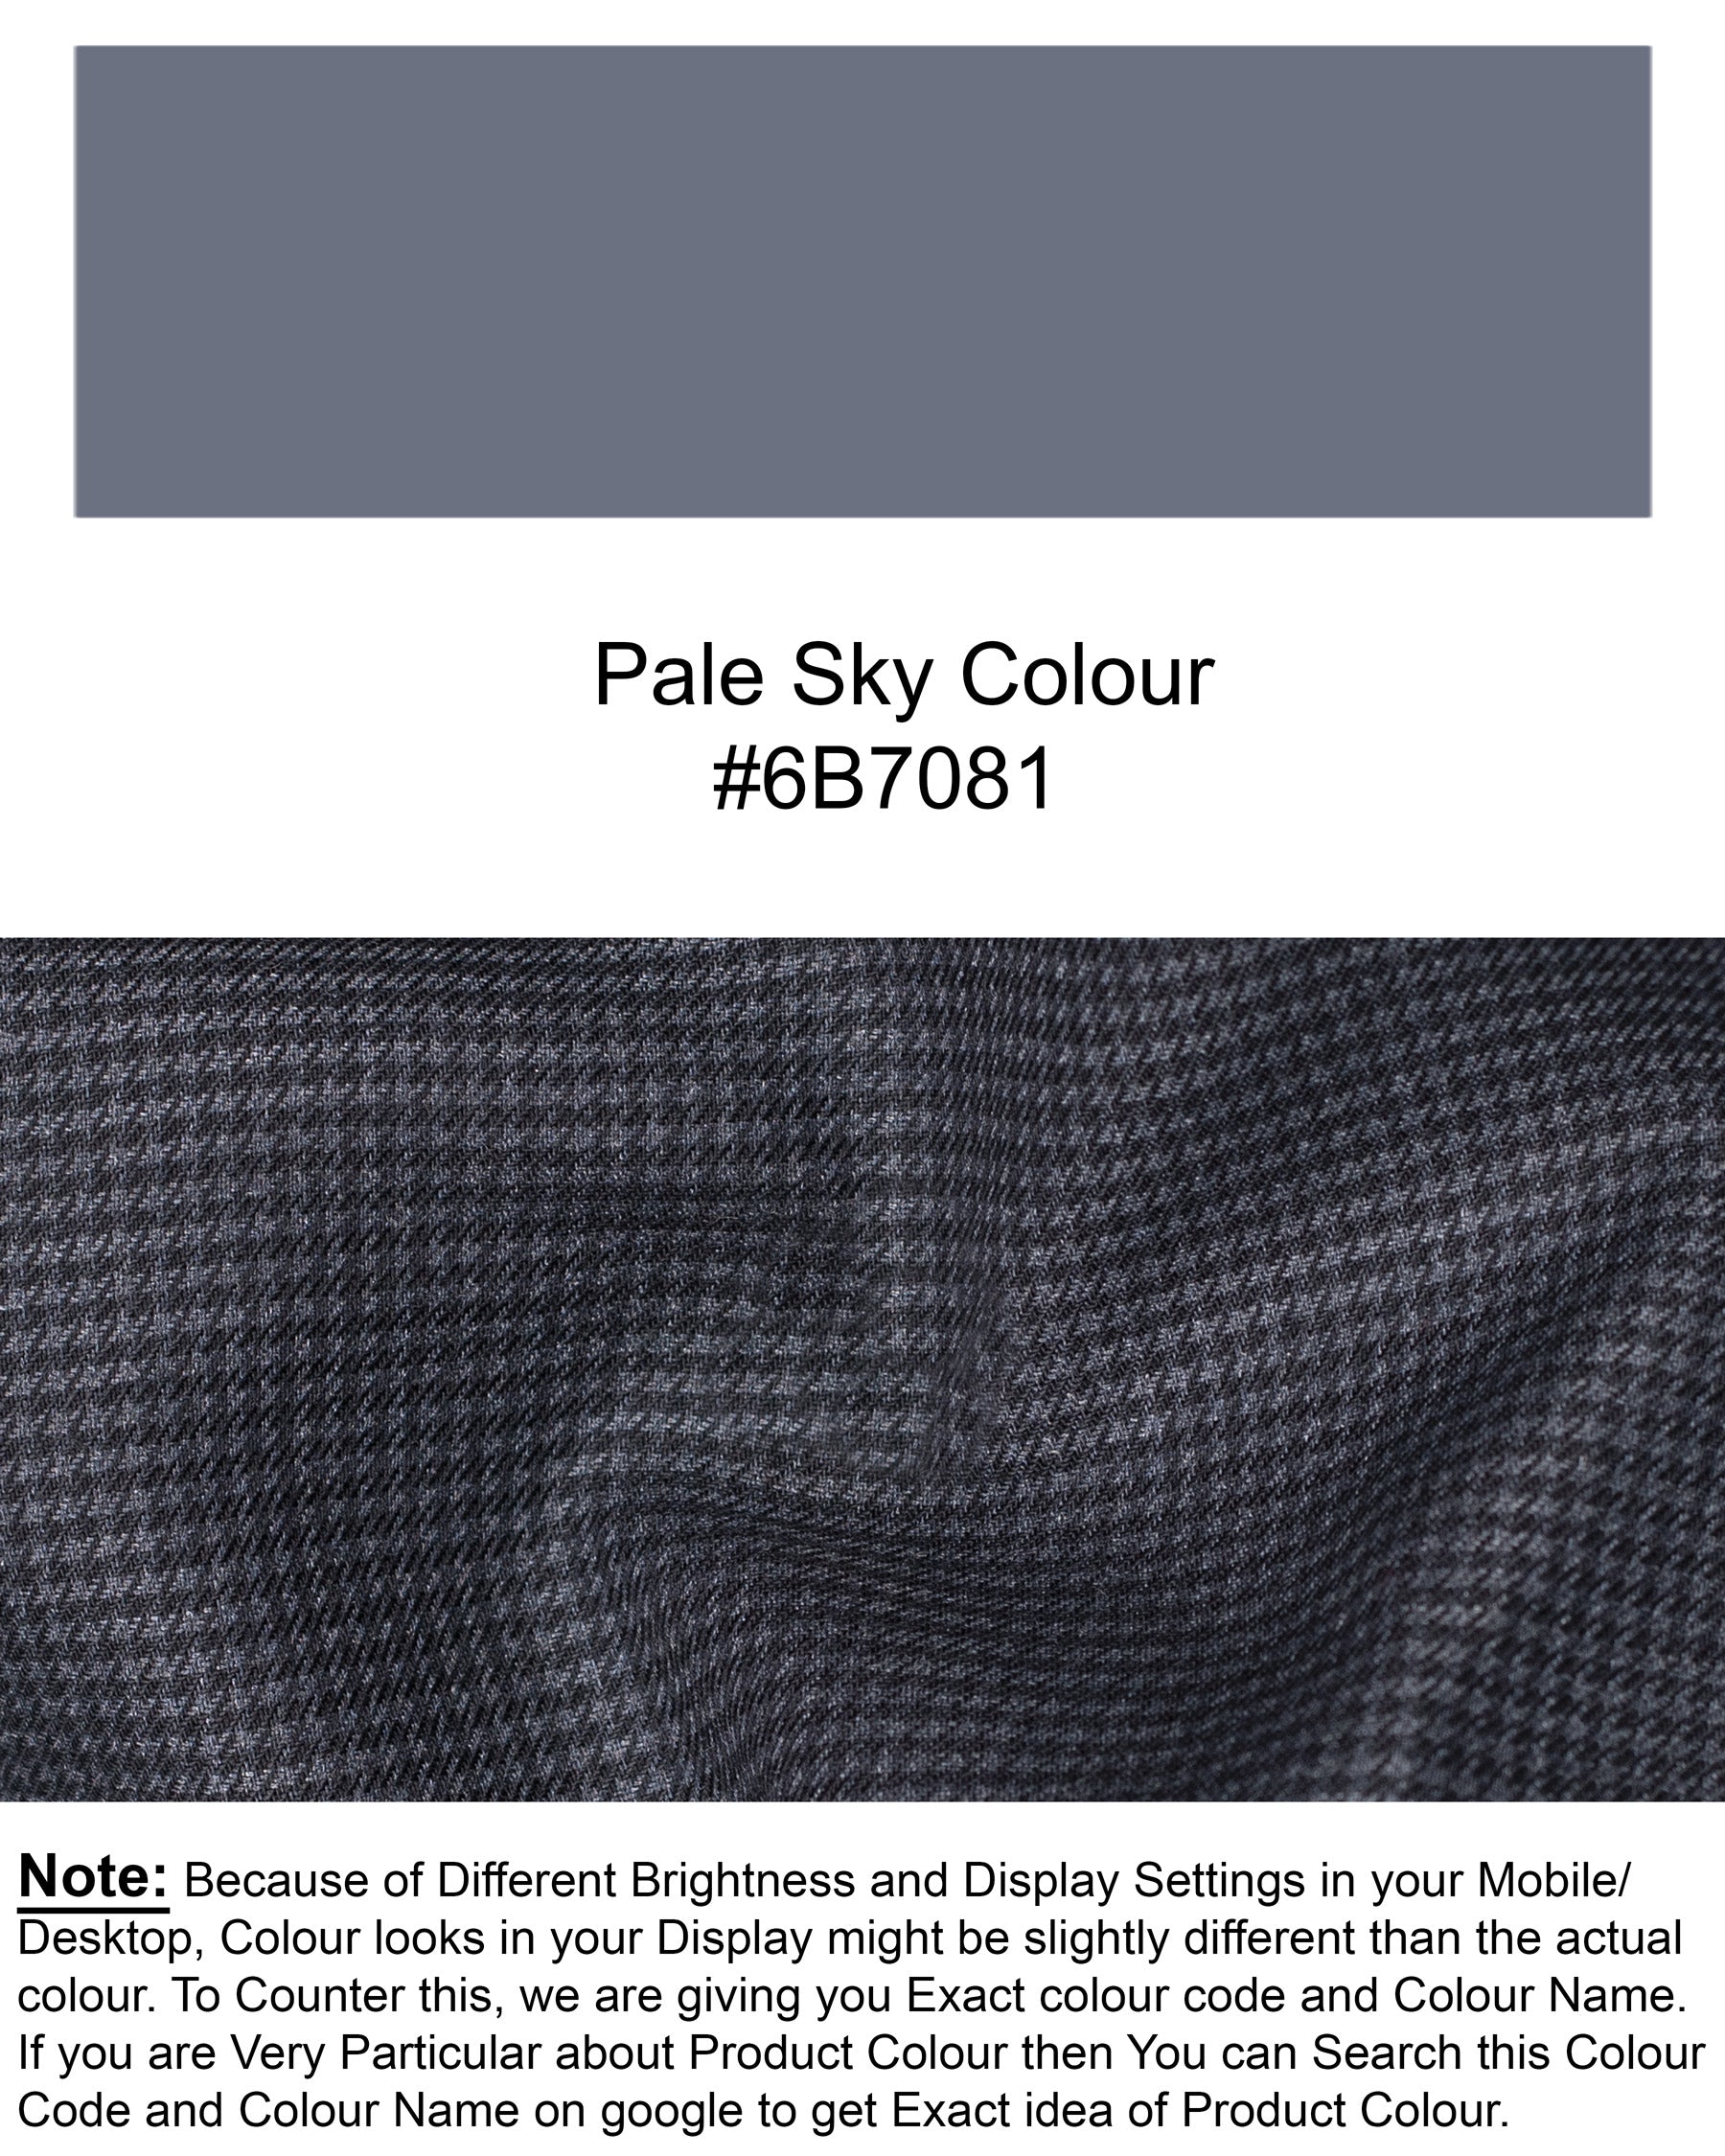 Pale Sky Grey houndstooth Wool Rich DouSTe Breasted Suit ST1311-DB-36, ST1311-DB-38, ST1311-DB-40, ST1311-DB-42, ST1311-DB-44, ST1311-DB-46, ST1311-DB-48, ST1311-DB-50, ST1311-DB-52, ST1311-DB-58, ST1311-DB-54, ST1311-DB-56, ST1311-DB-60